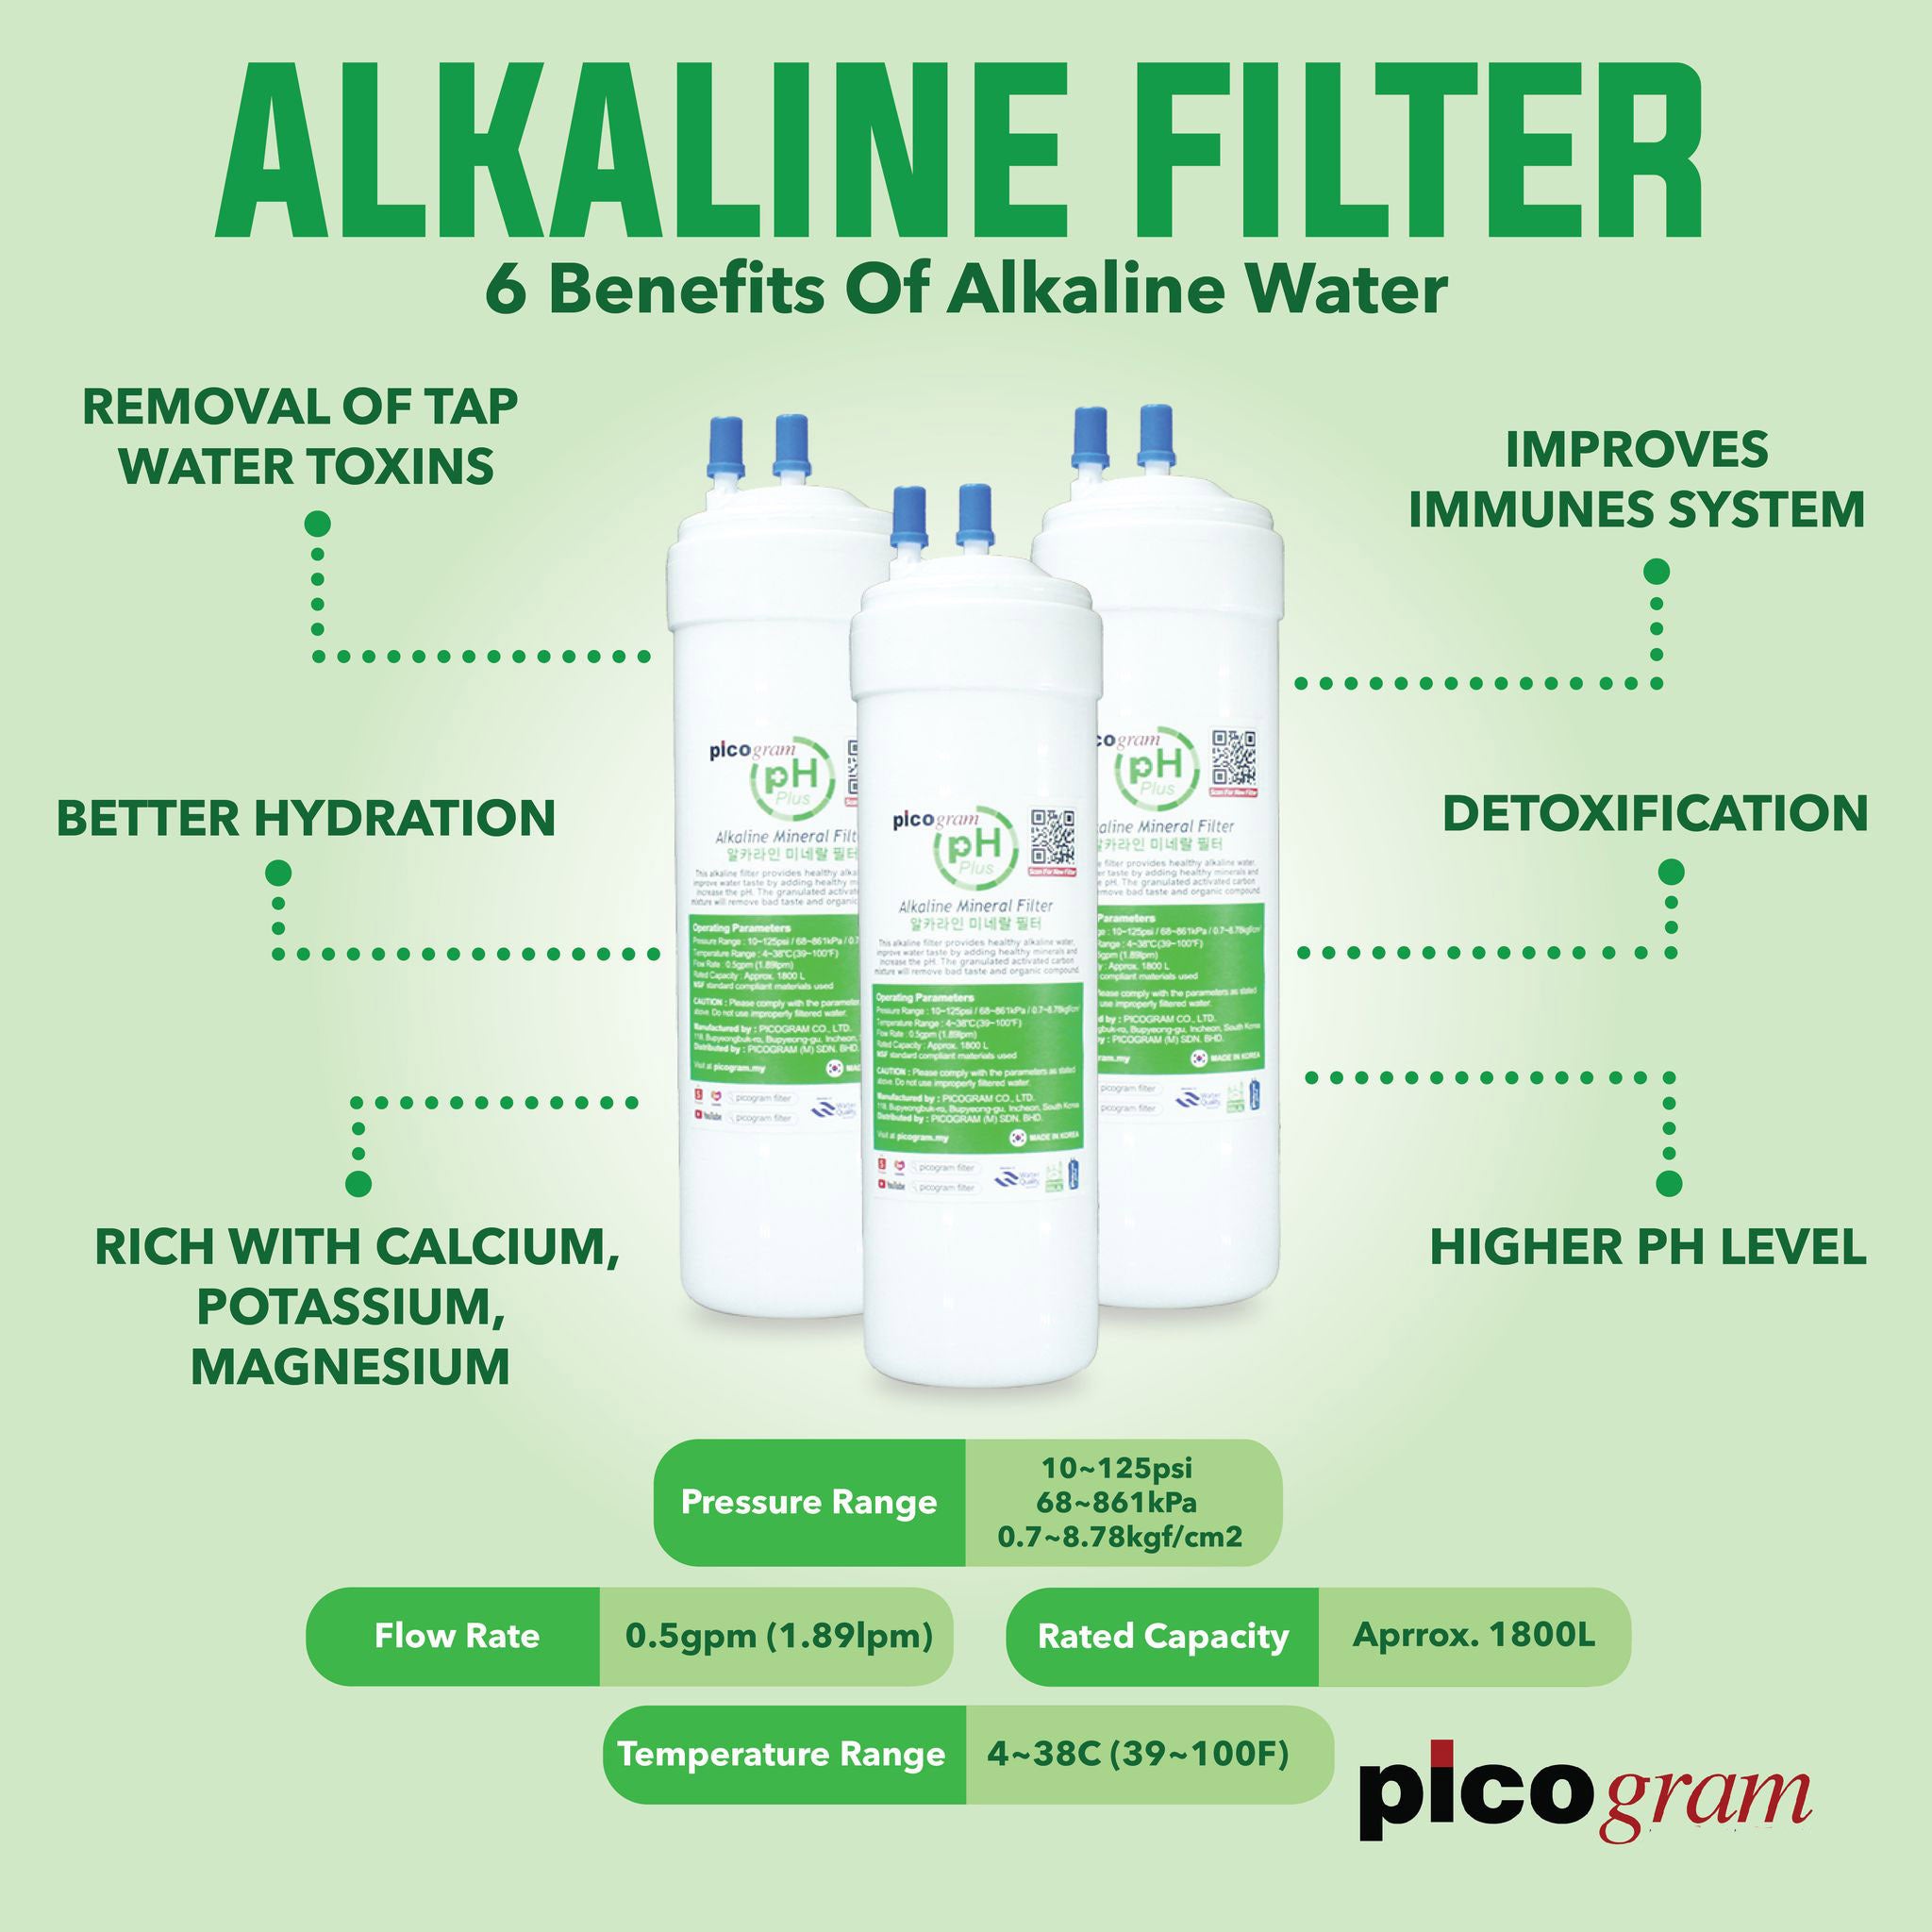 [FREE eXtra 4 Filters for 2nd Year] Picogram Nano Technology, Electro Positive Membrane, pH Alkaline ORP Antioxidant Drinking Water Purifier System, Virus, Bacterial, Heavy Metals, Chemicals, Chlorine &amp; Odor Taste FREE! Tested &amp; proven by lab!